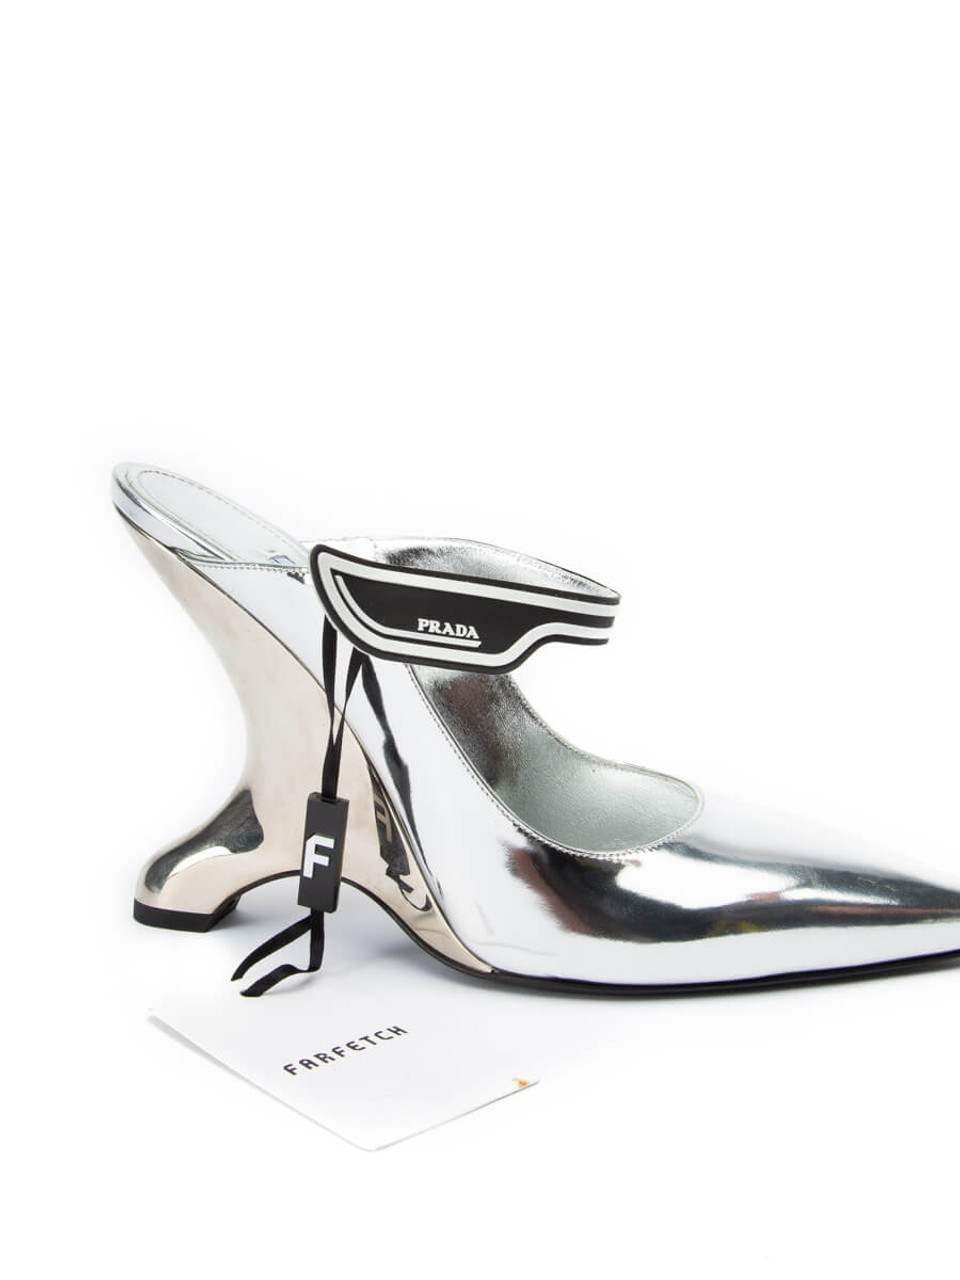 Prada Women's Madge 110mm Wedge Mules, Size 7 UK, Silver Patent Leather